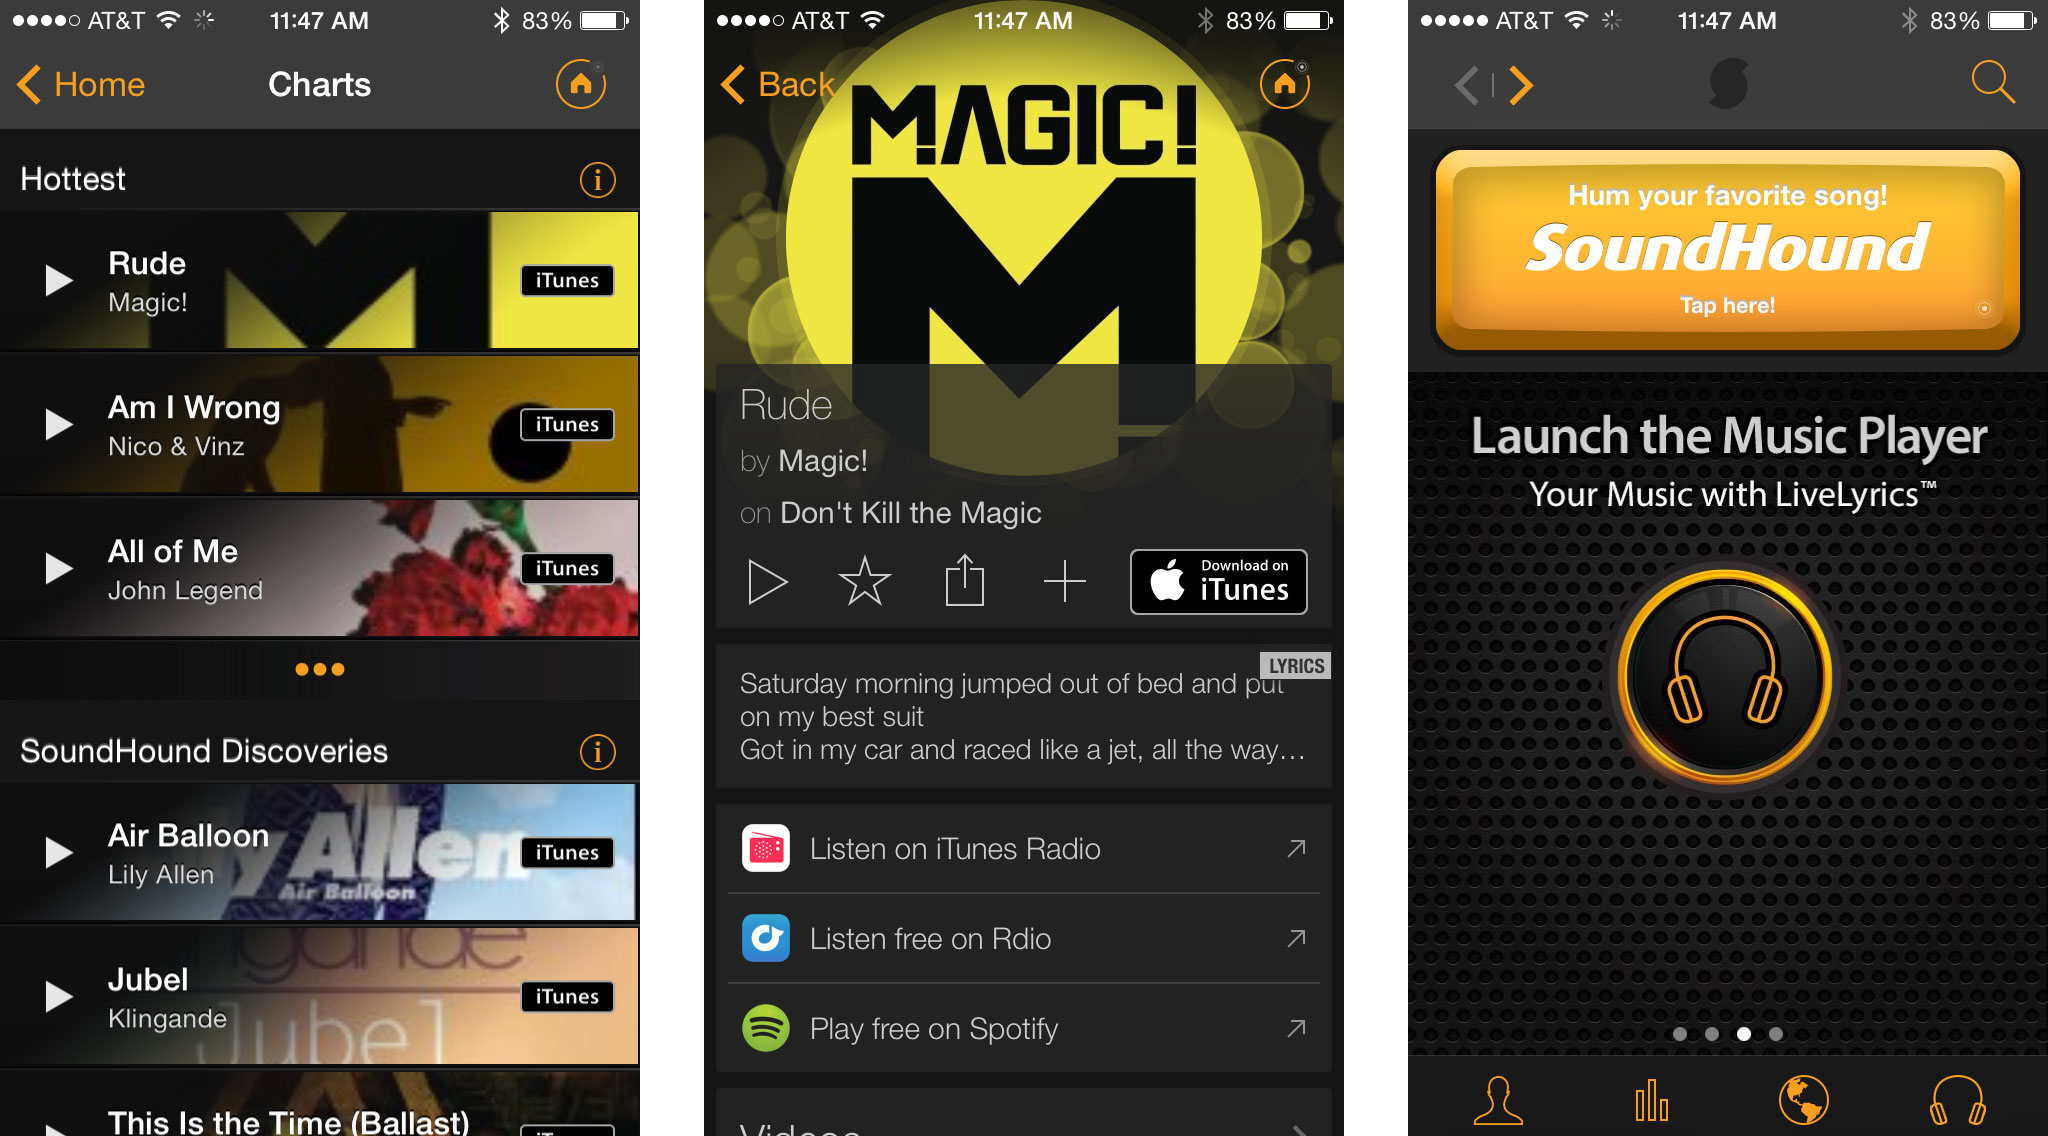 Best music discovery apps for iPhone: SoundHound